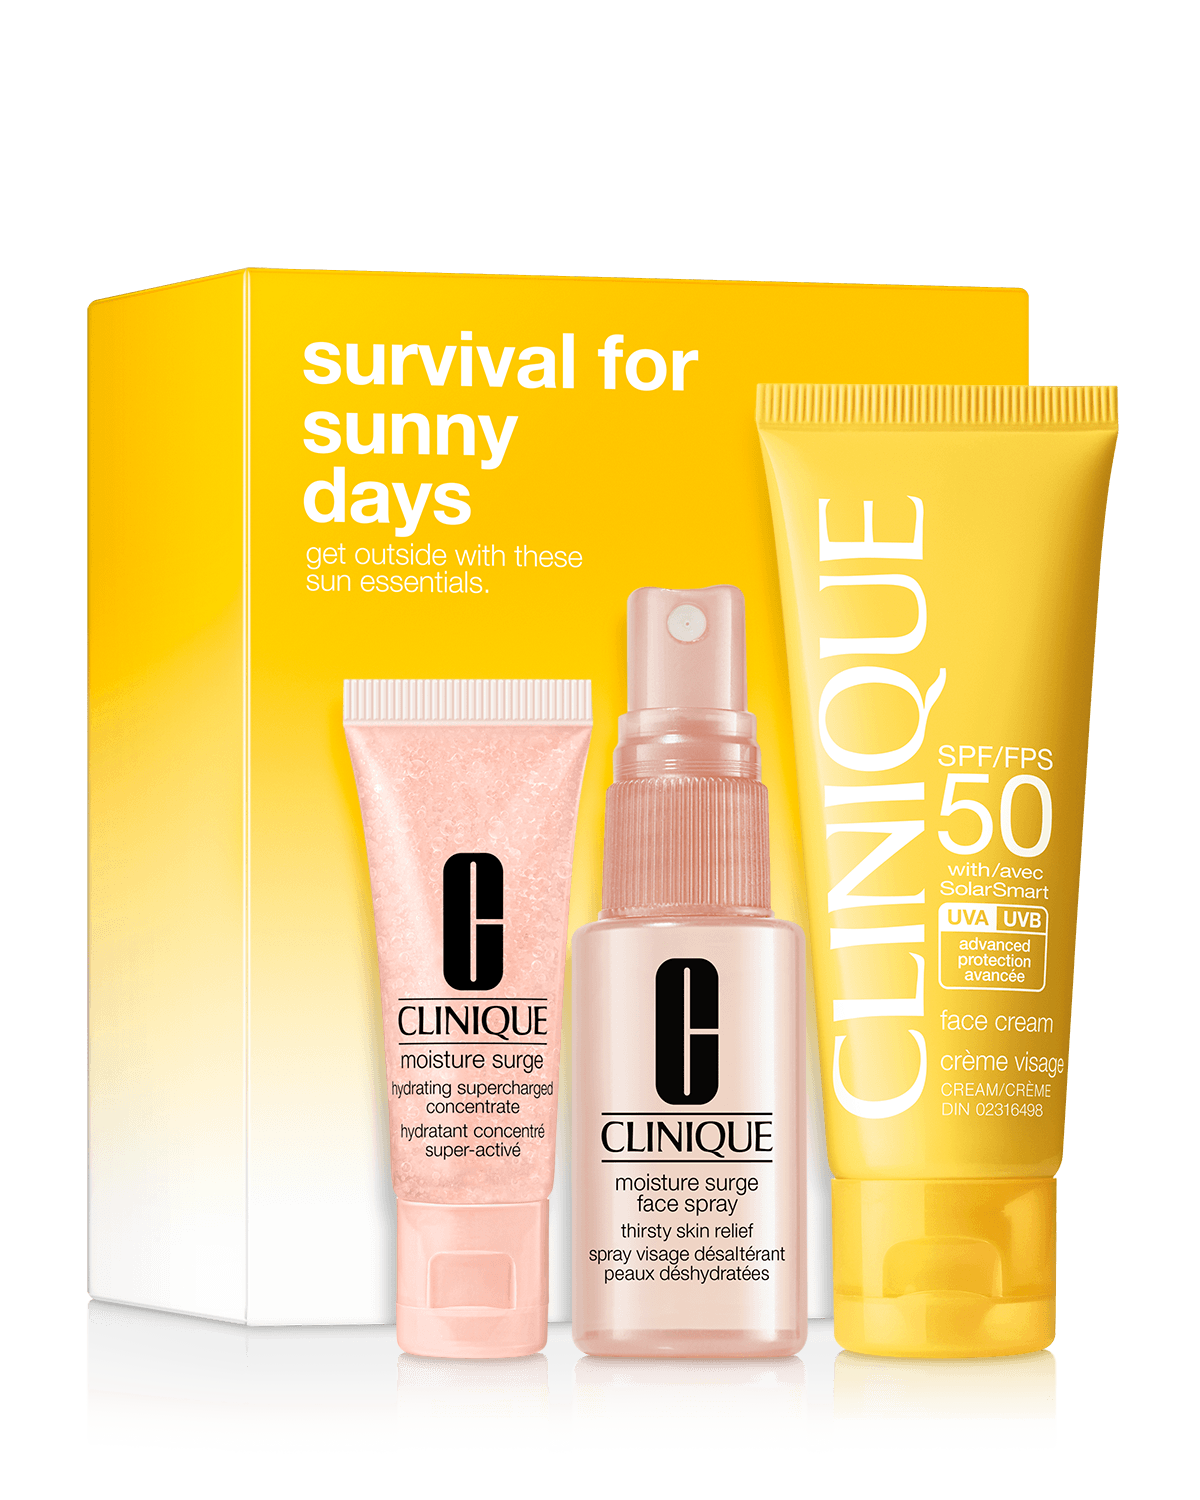 Survival for Sunny Days SOS Kit